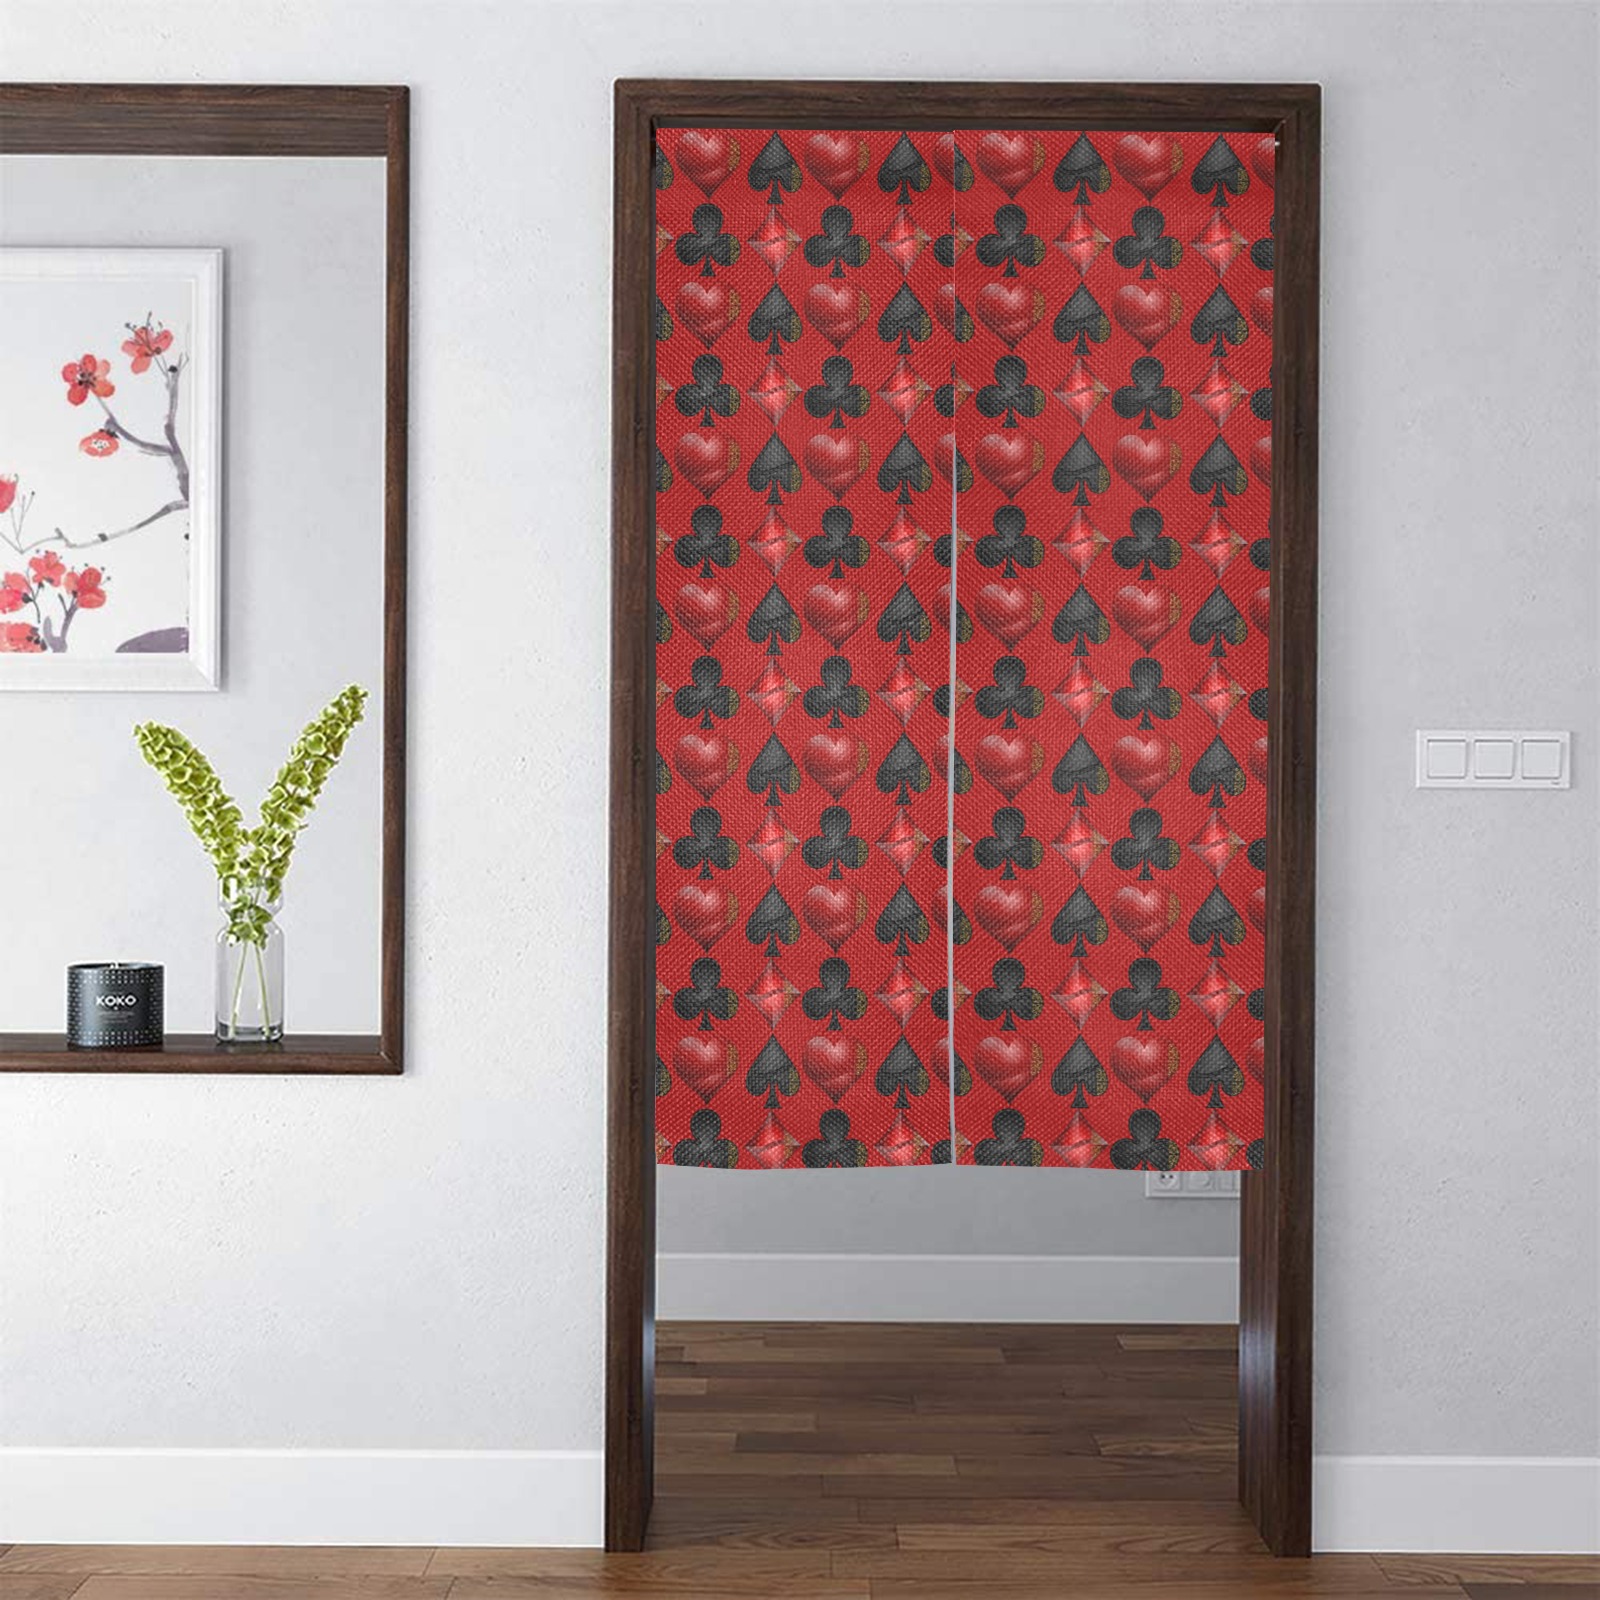 Las Vegas Playing Card Symbols on Red Door Curtain Tapestry